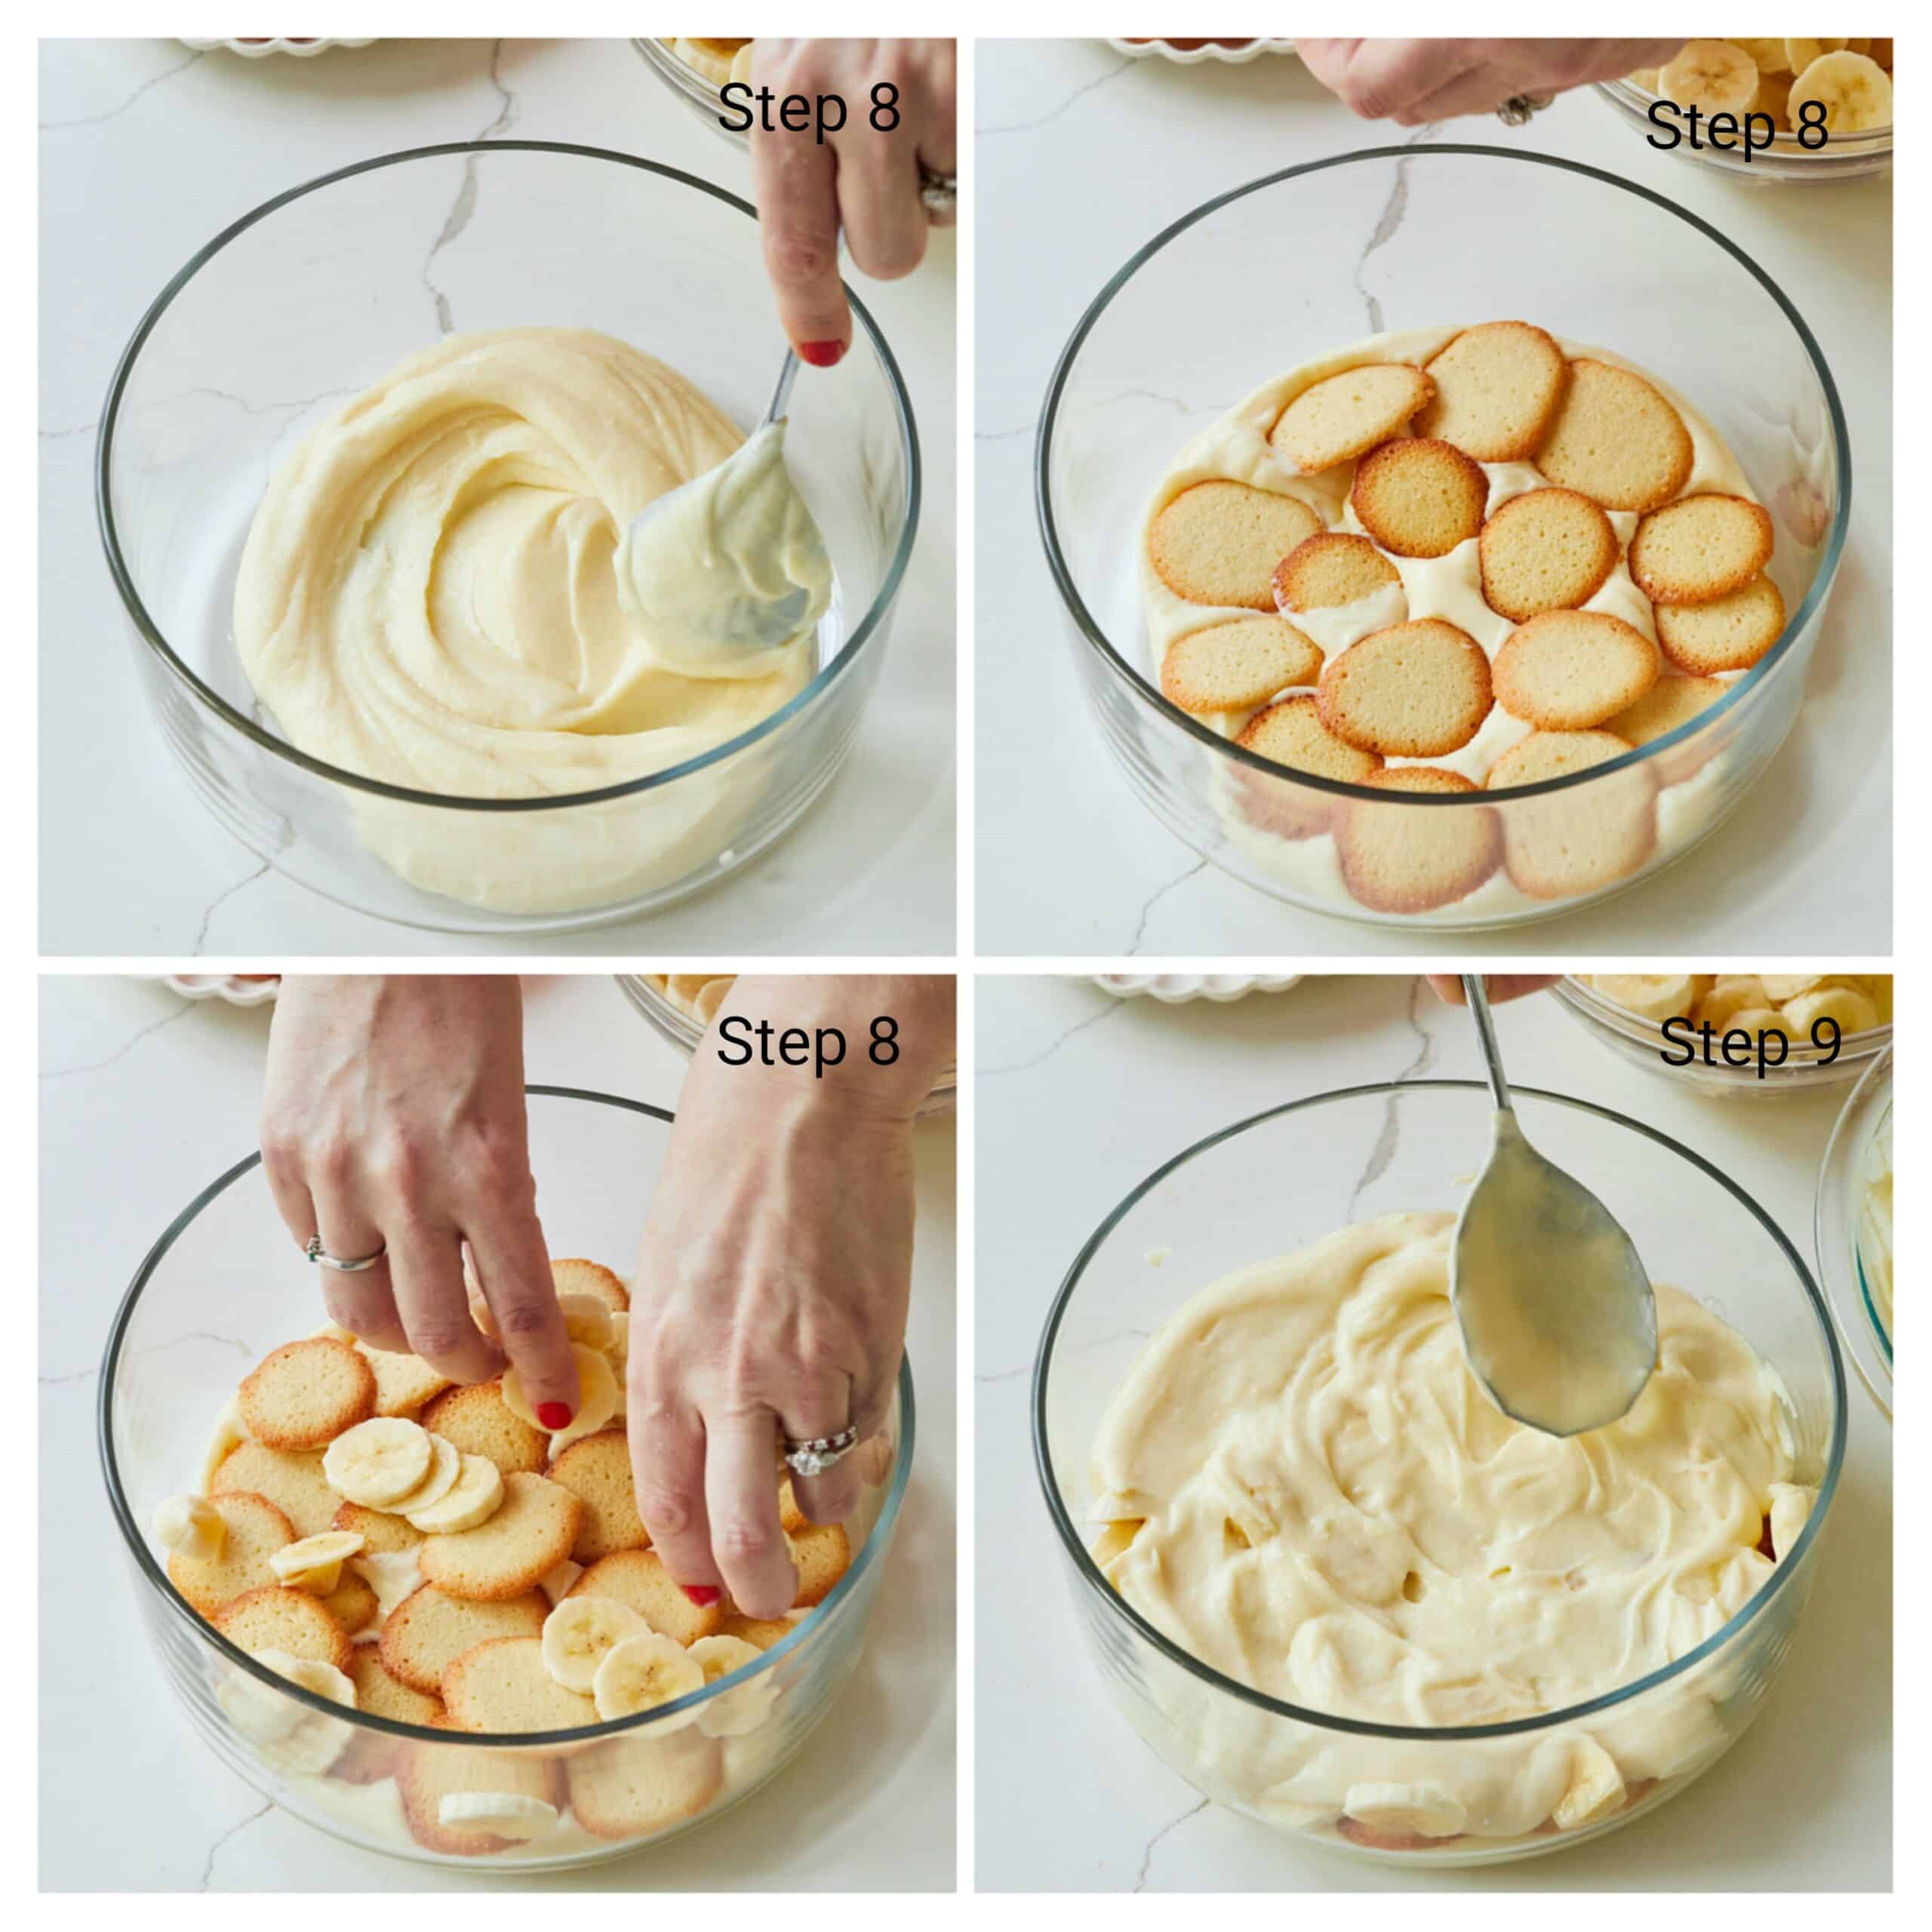 Step-by-step instructions on how to Make Banana pudding : Spread pudding in the bottom of a serving bowl. Layer half of the Nilla Wafers over the pudding followed by half of the banana slices. Spread another layer of pudding on top of the bananas, then layer on the remaining wafers and remaining bananas.